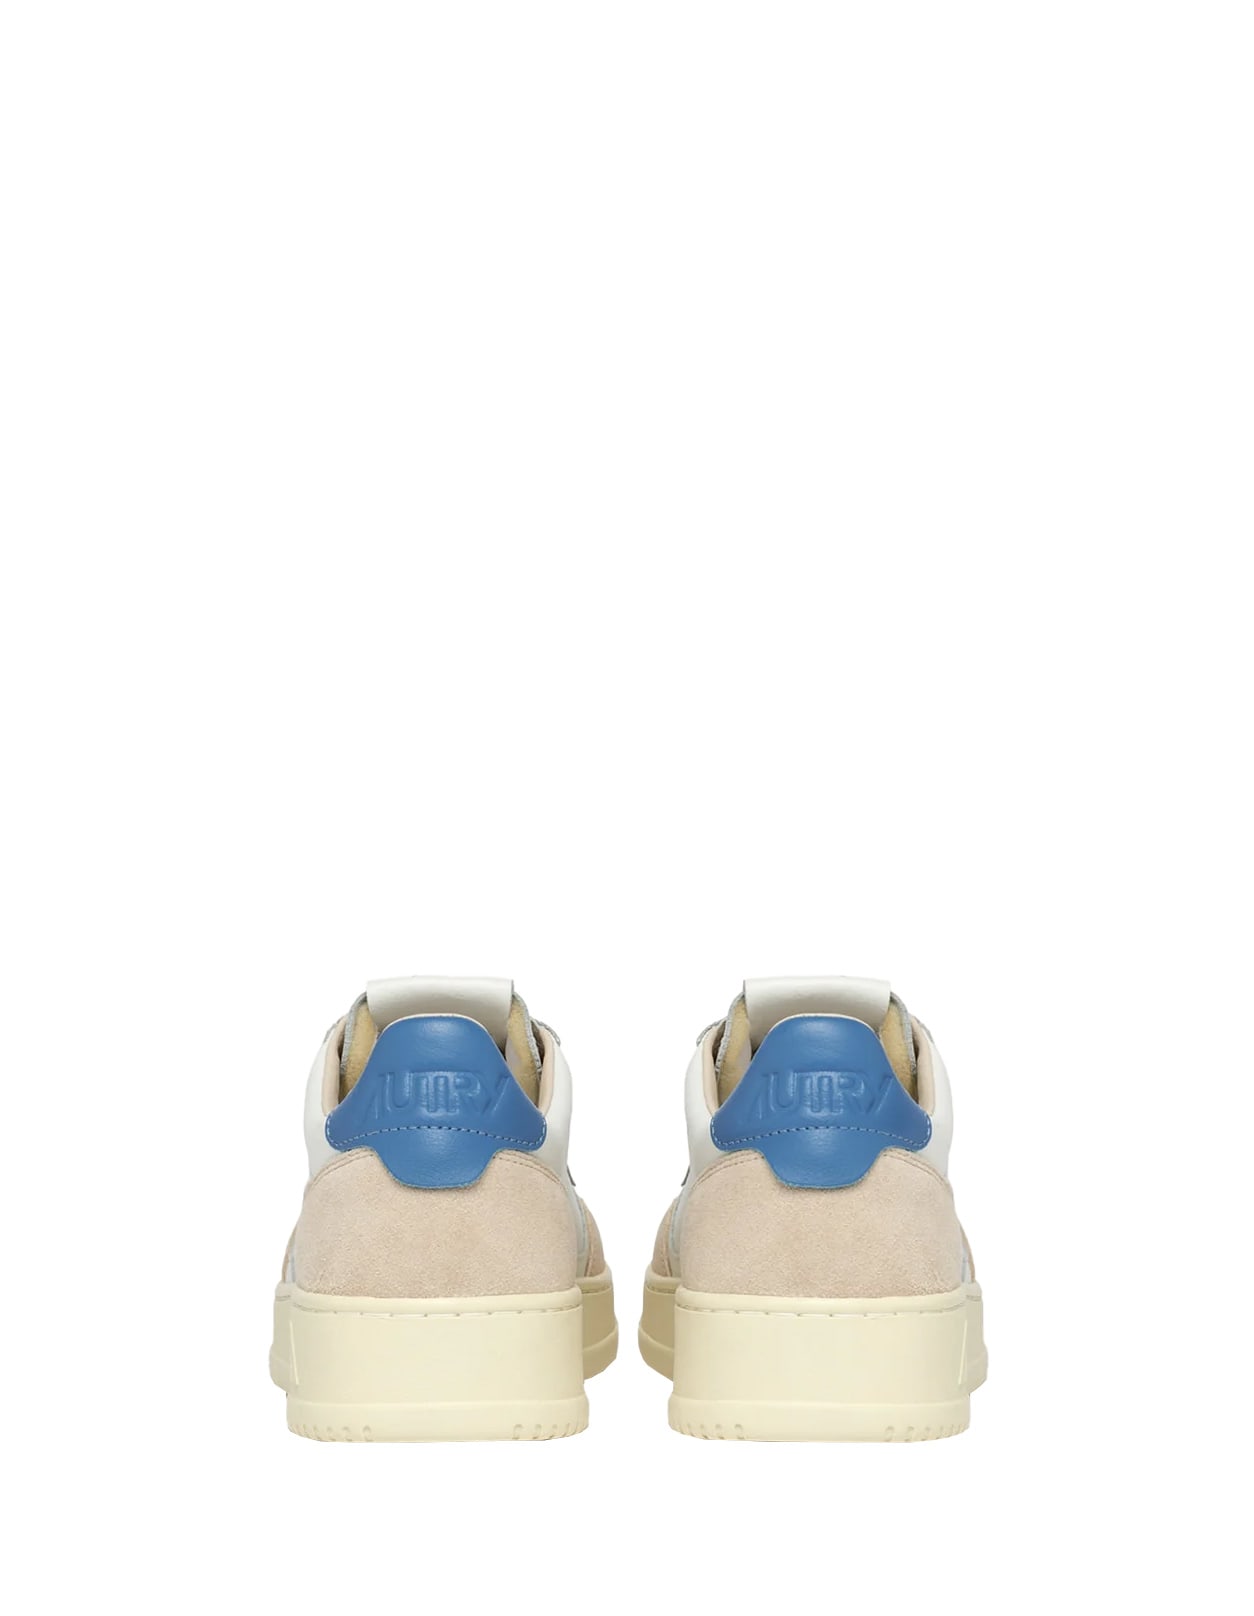 Shop Autry Medalist Low Sneakers In White And Blue Suede And Leather